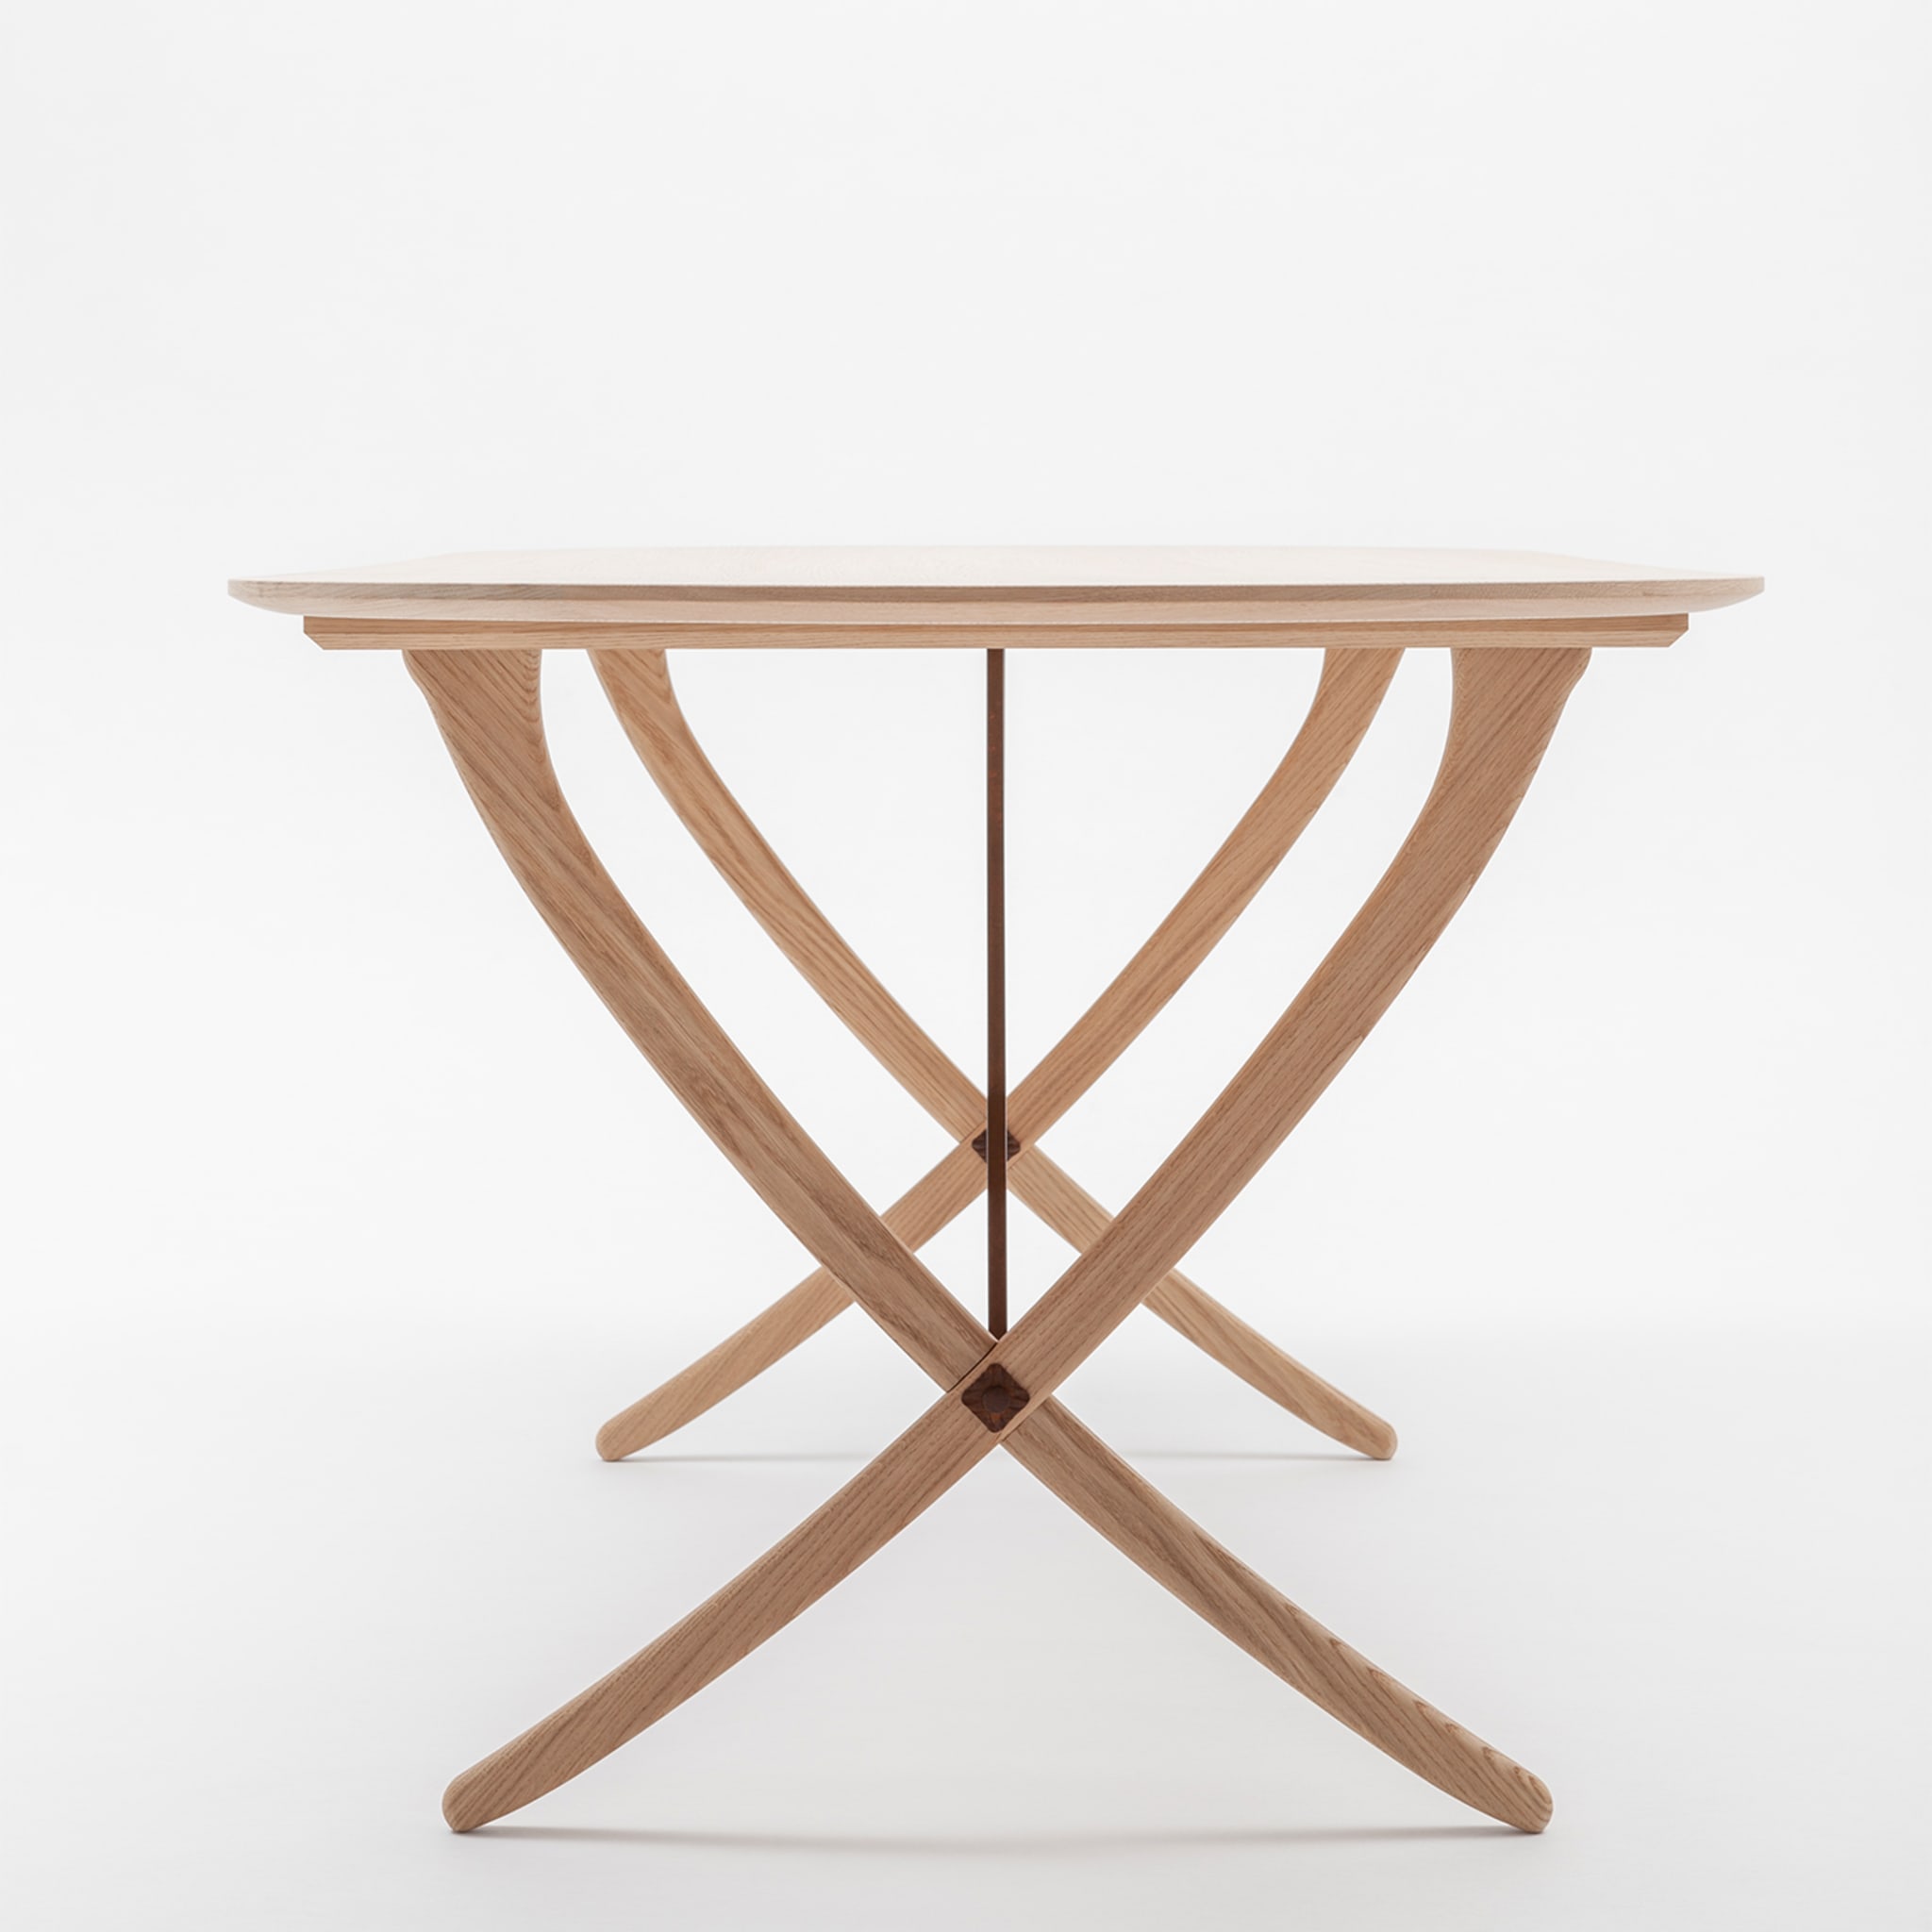 Arch Small Durmast Dining Table - Alternative view 3